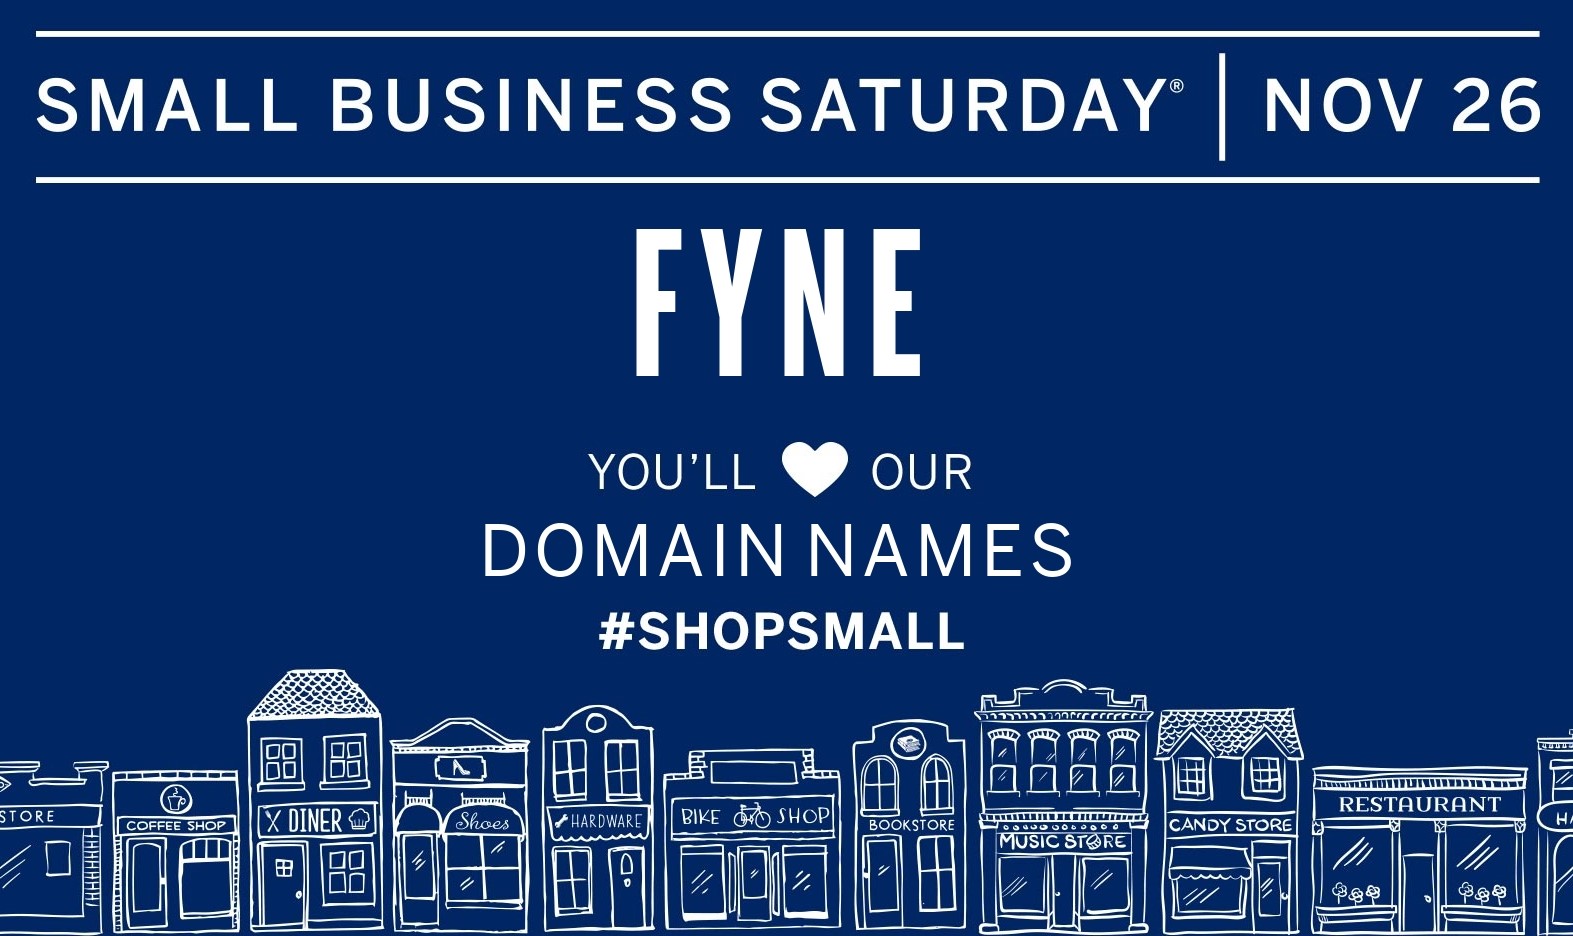 FYNE - Small Business Saturday 2016